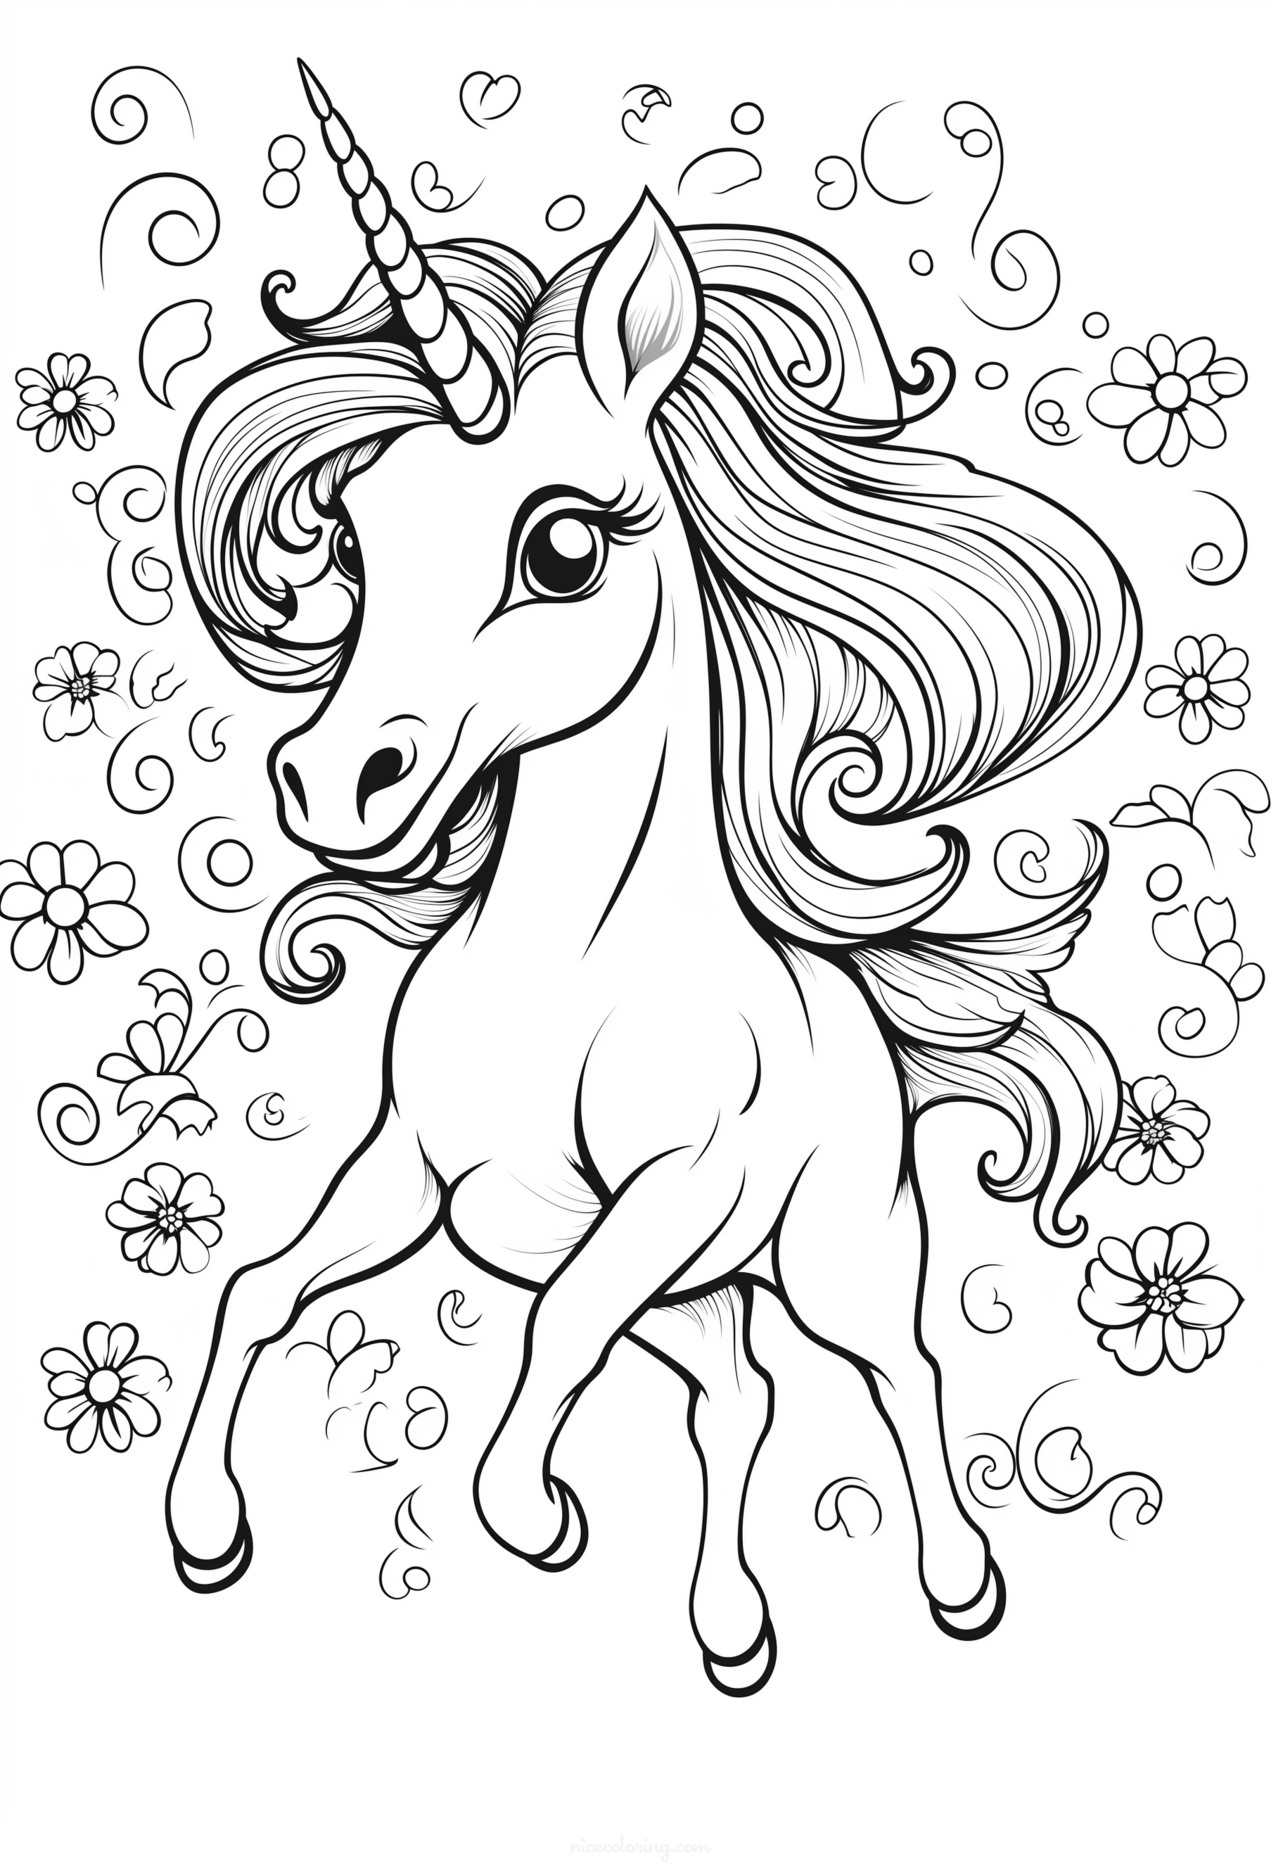 Enchanted unicorn in a mystical forest coloring page